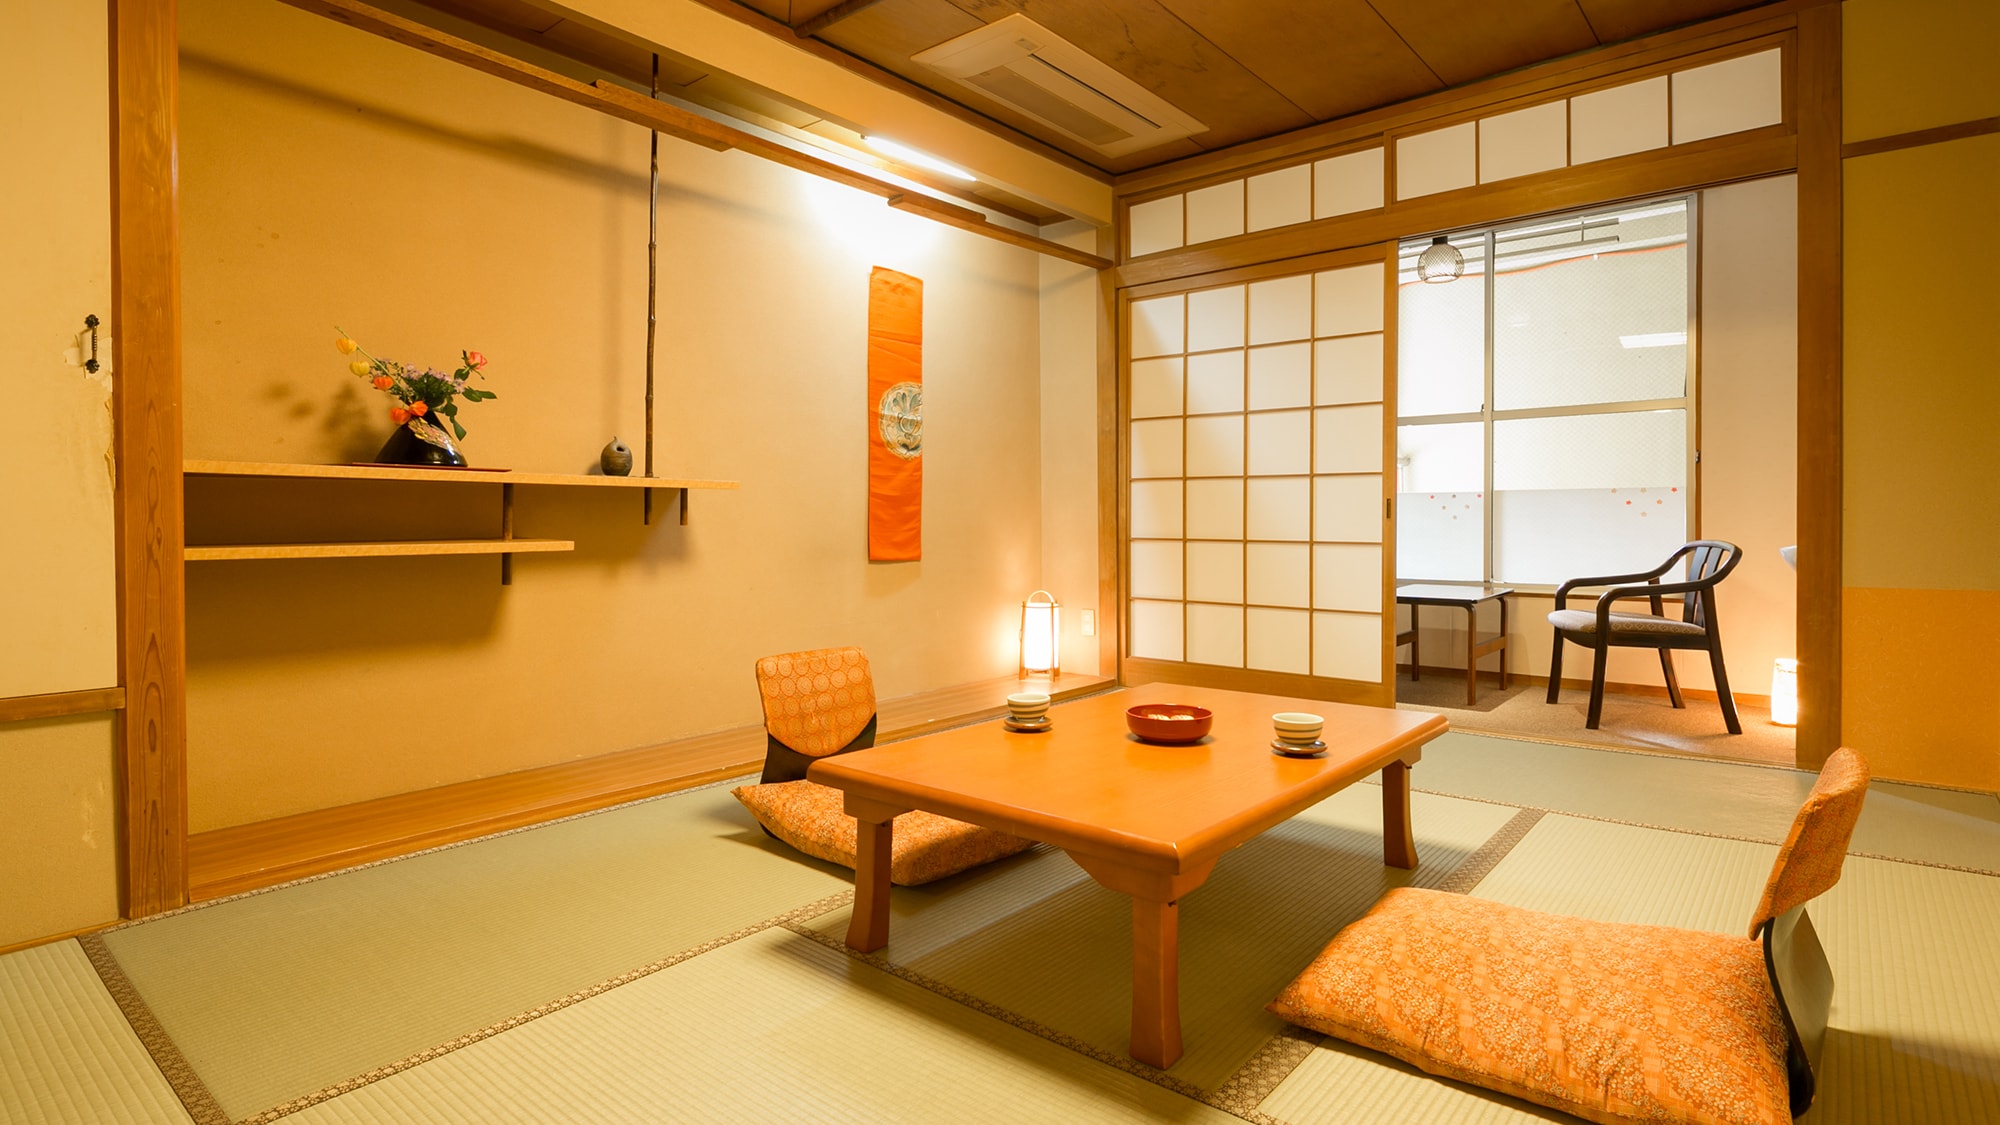 ■ Japanese-style room 7.5 tatami mats ■ It's a little narrow, but it's the perfect size for your favorite person!